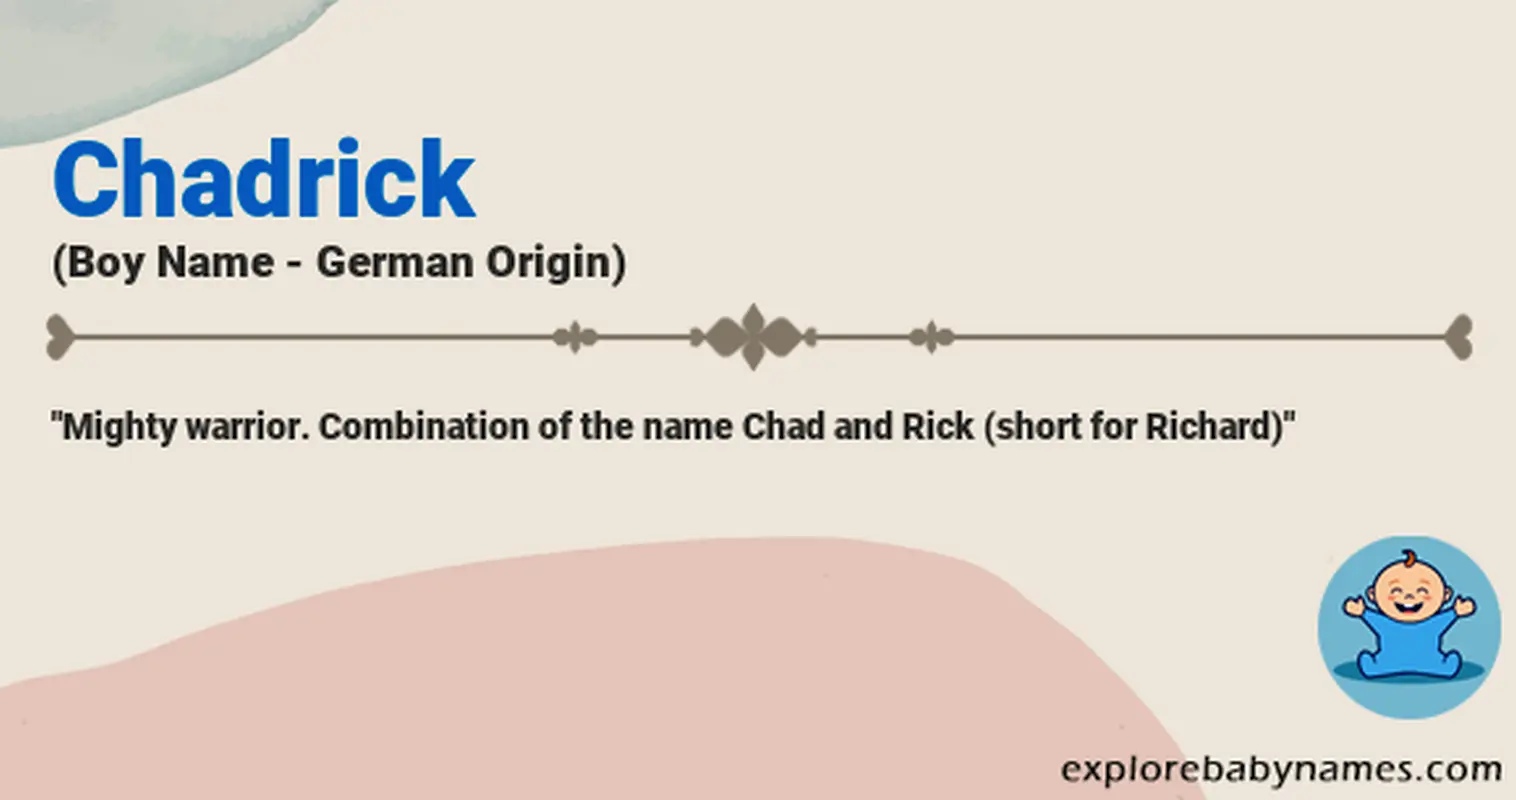 Meaning of Chadrick